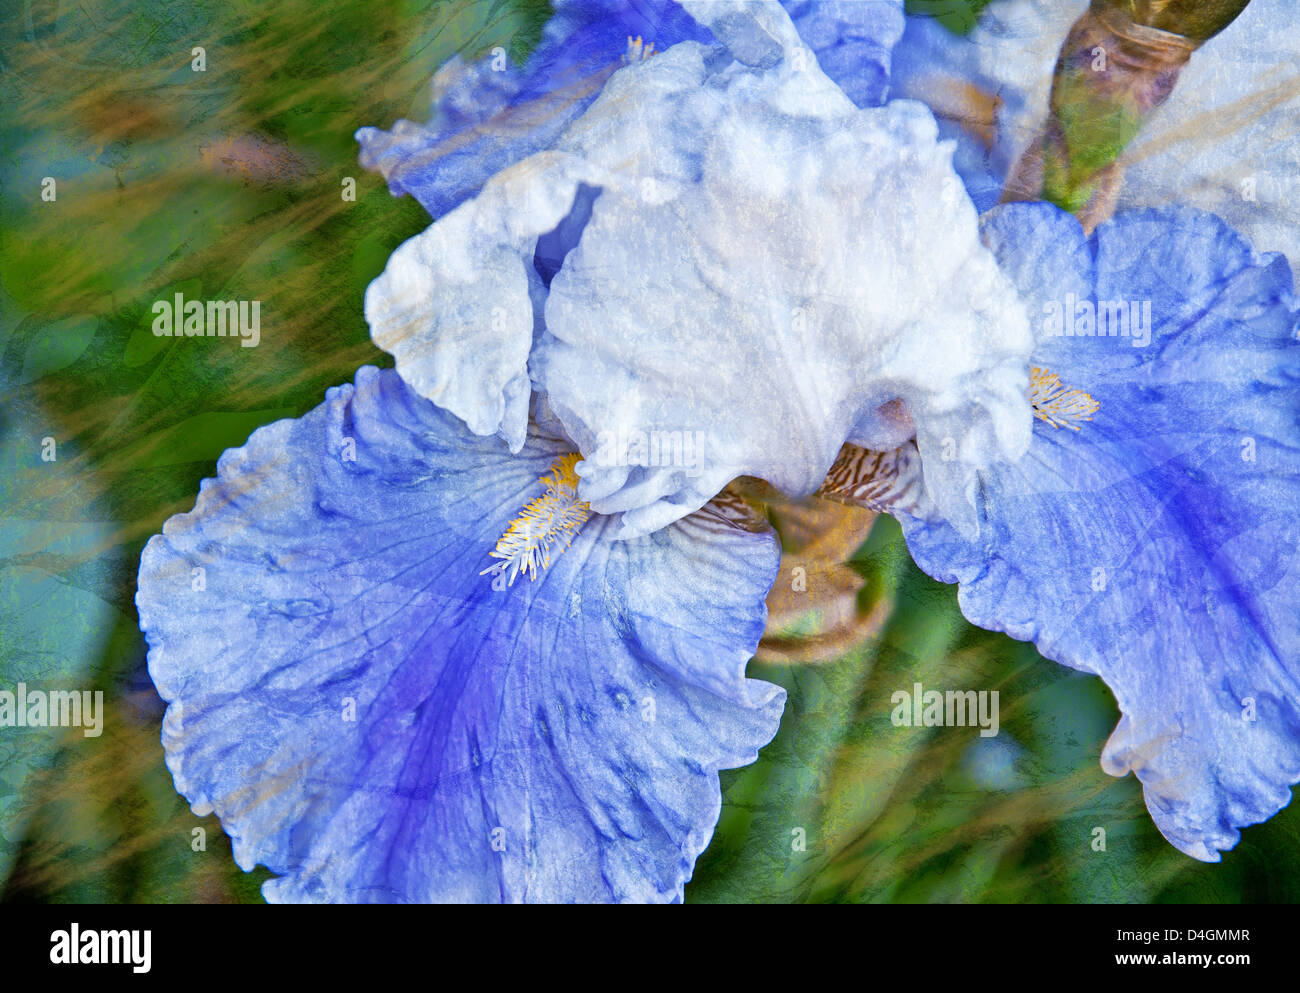 This is an artistic, textured flower of a blue and white Japanese Iris in a horizontal format. Stock Photo